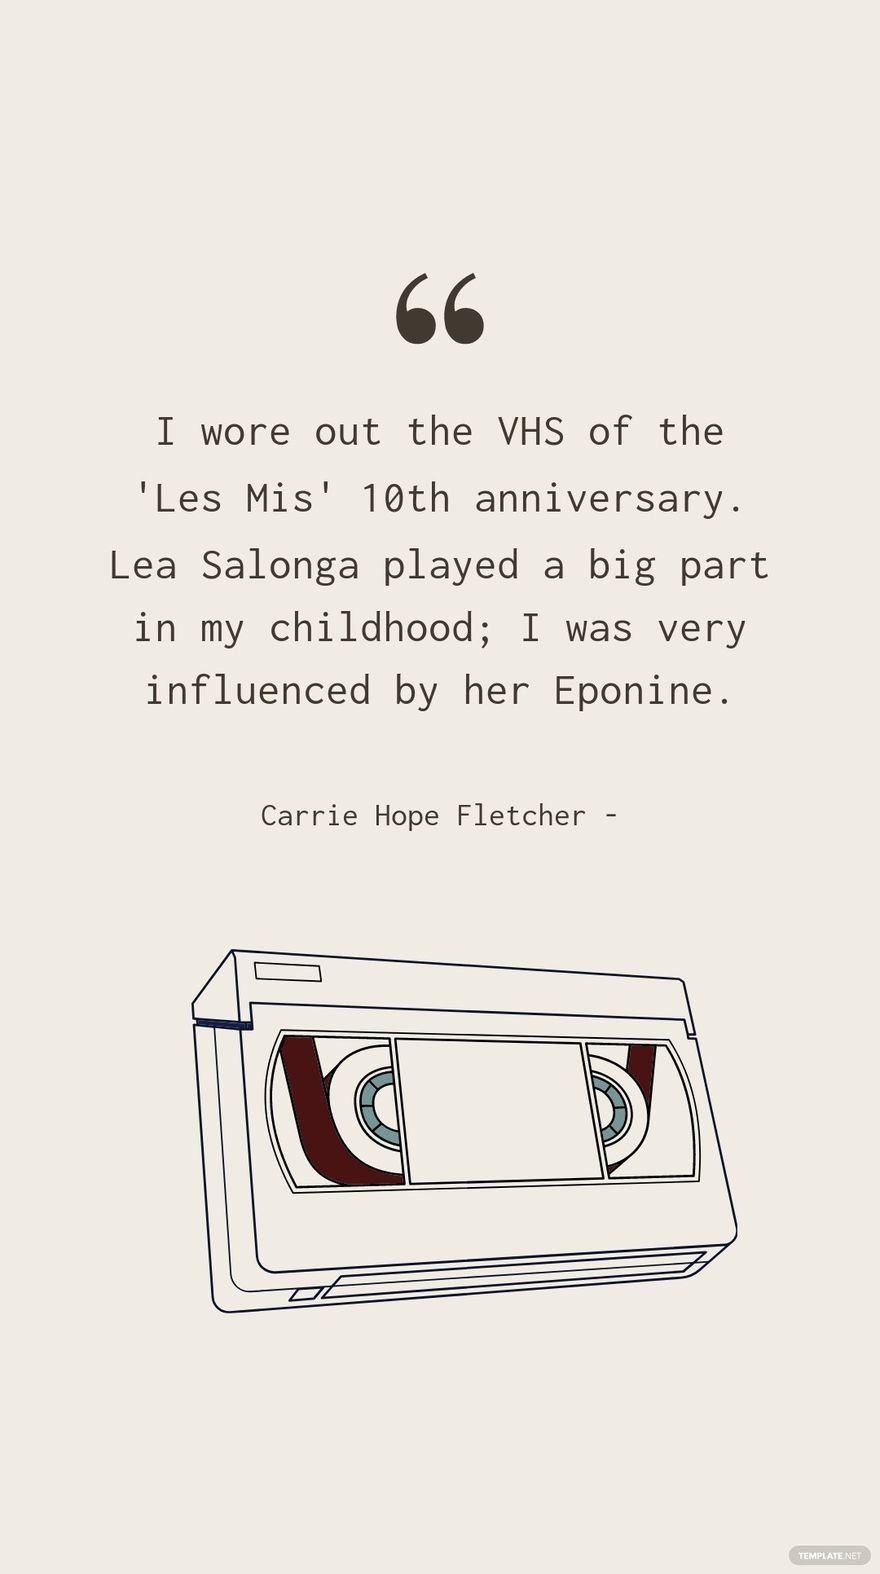 Carrie Hope Fletcher - I wore out the VHS of the 'Les Mis' 10th anniversary. Lea Salonga played a big part in my childhood; I was very influenced by her Eponine.